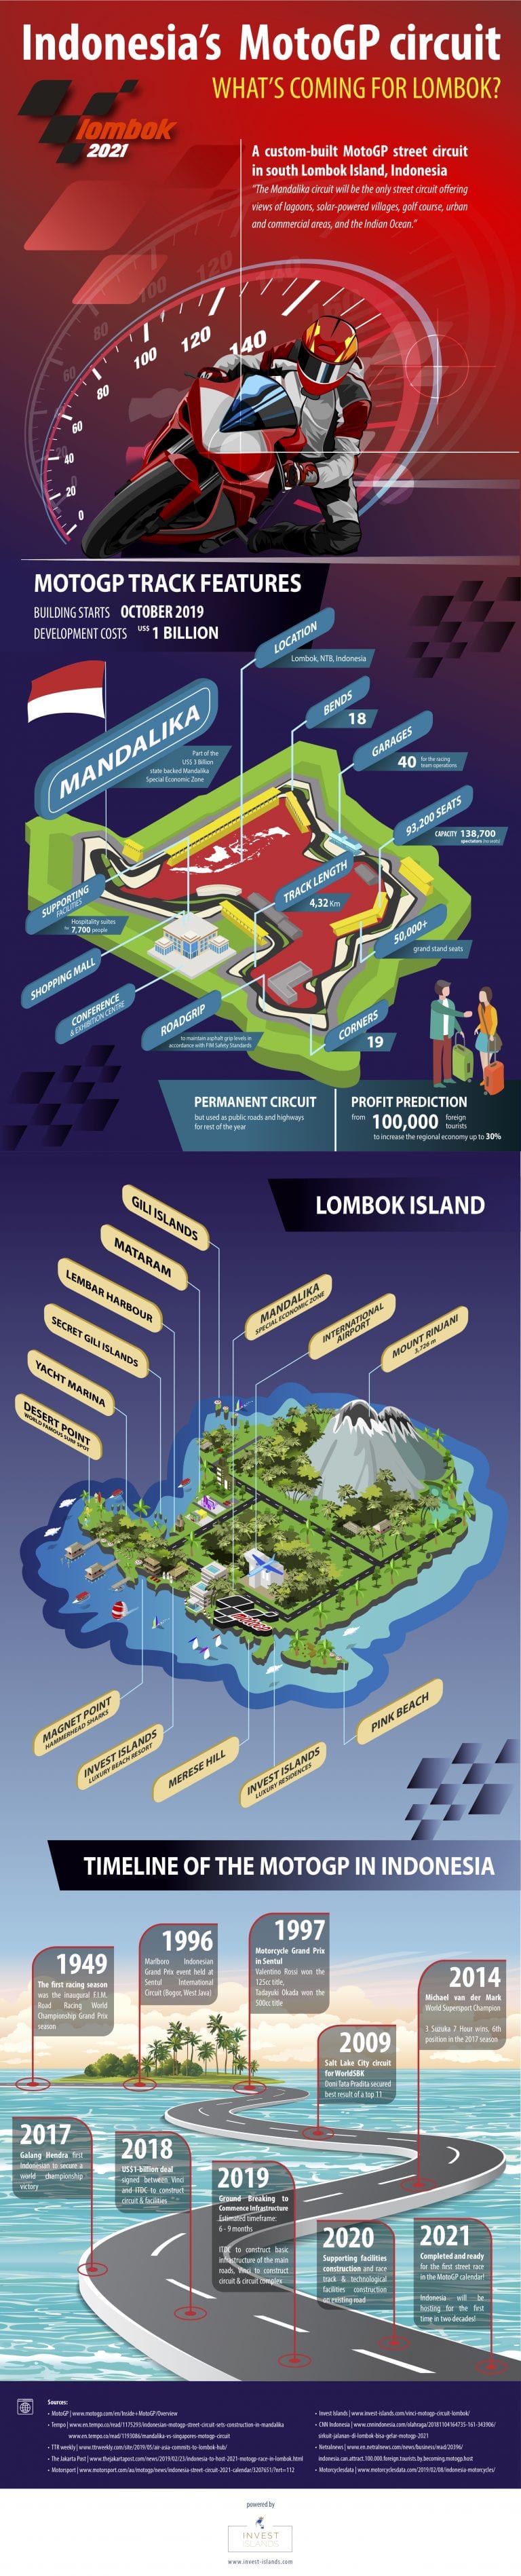 The MotoGP Lombok 2021: The Story Behind The Mandalika Circuit In Indonesia